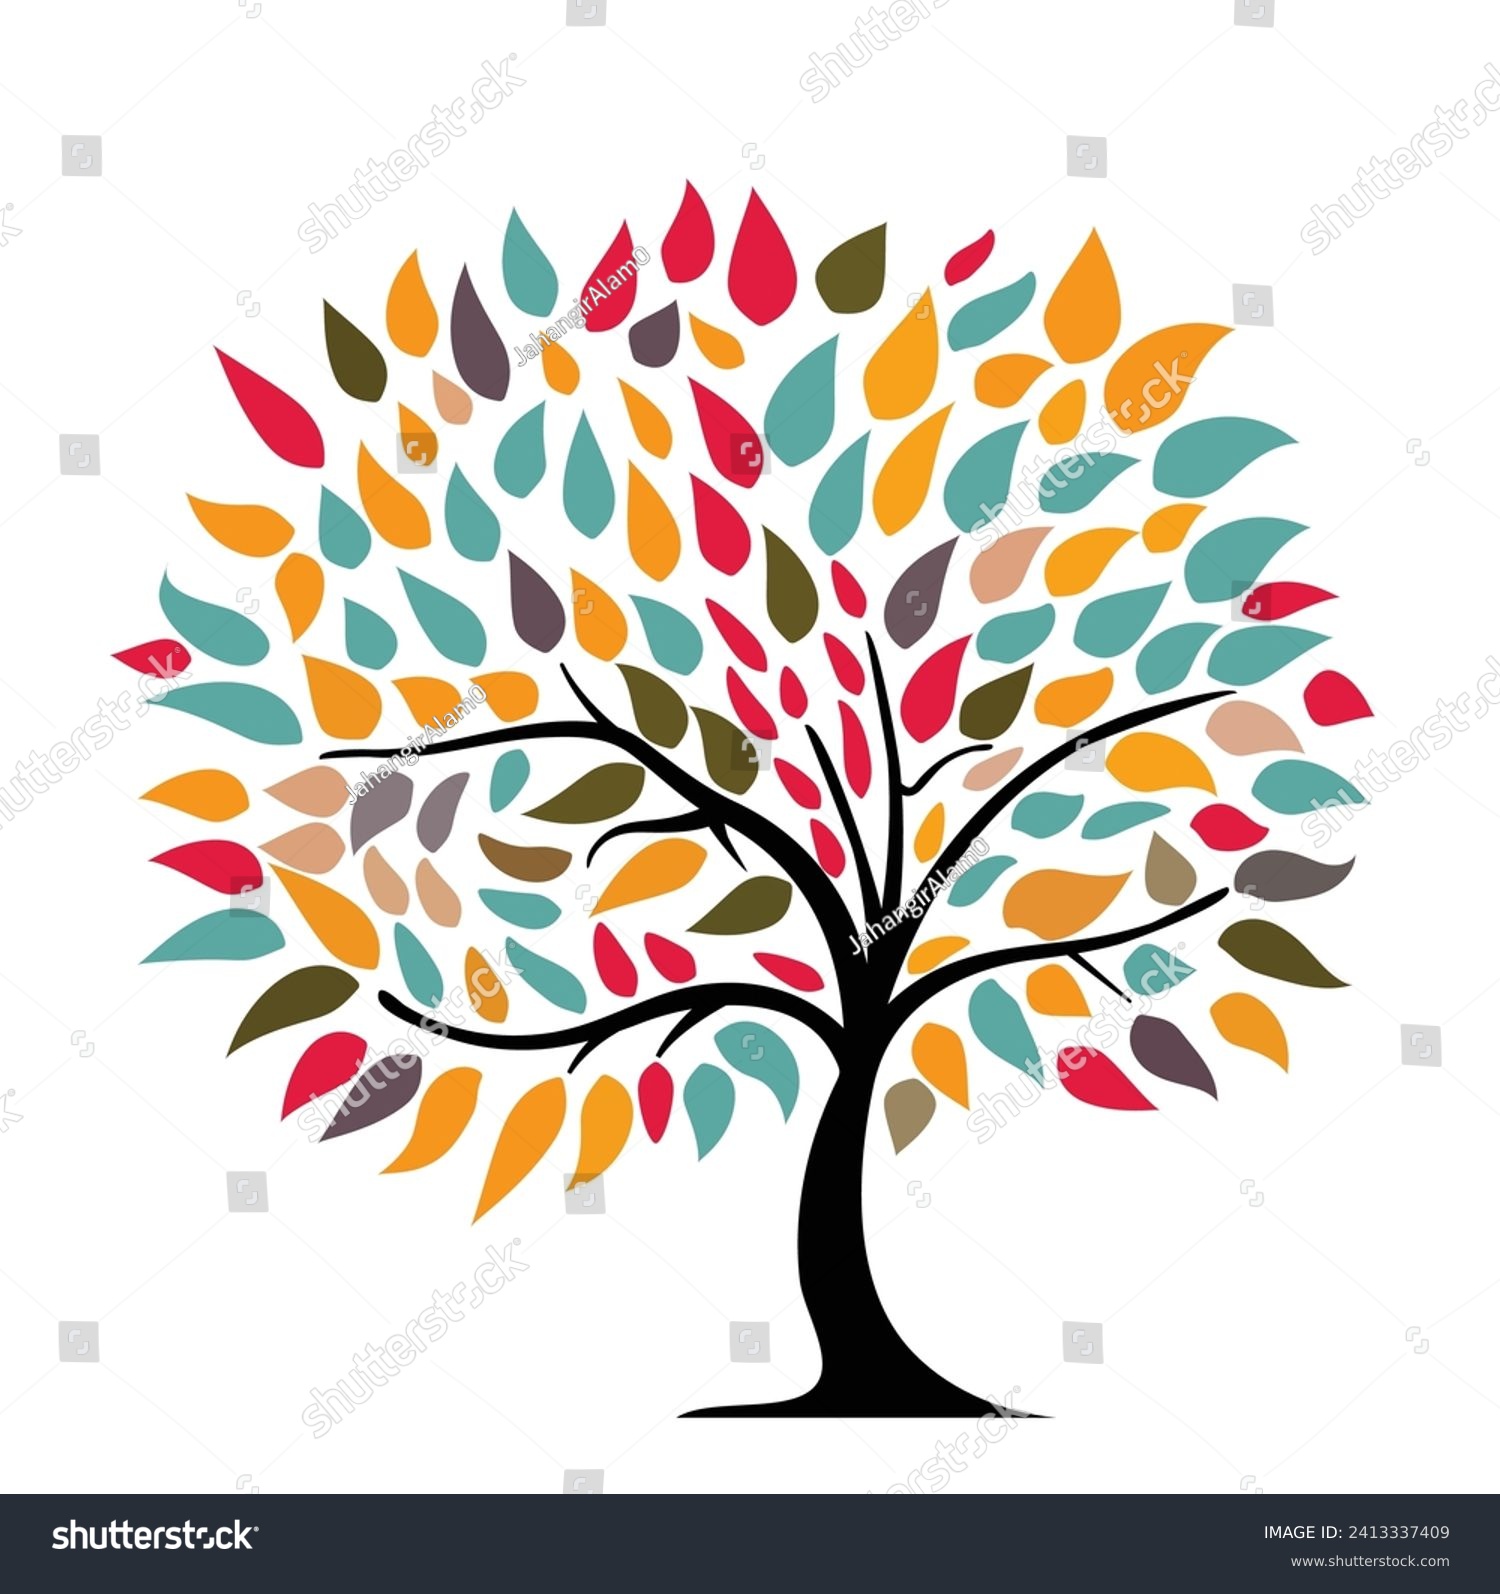 SVG of vector elegant custom colorful tree with vibrant leaves hanging branches illustration svg